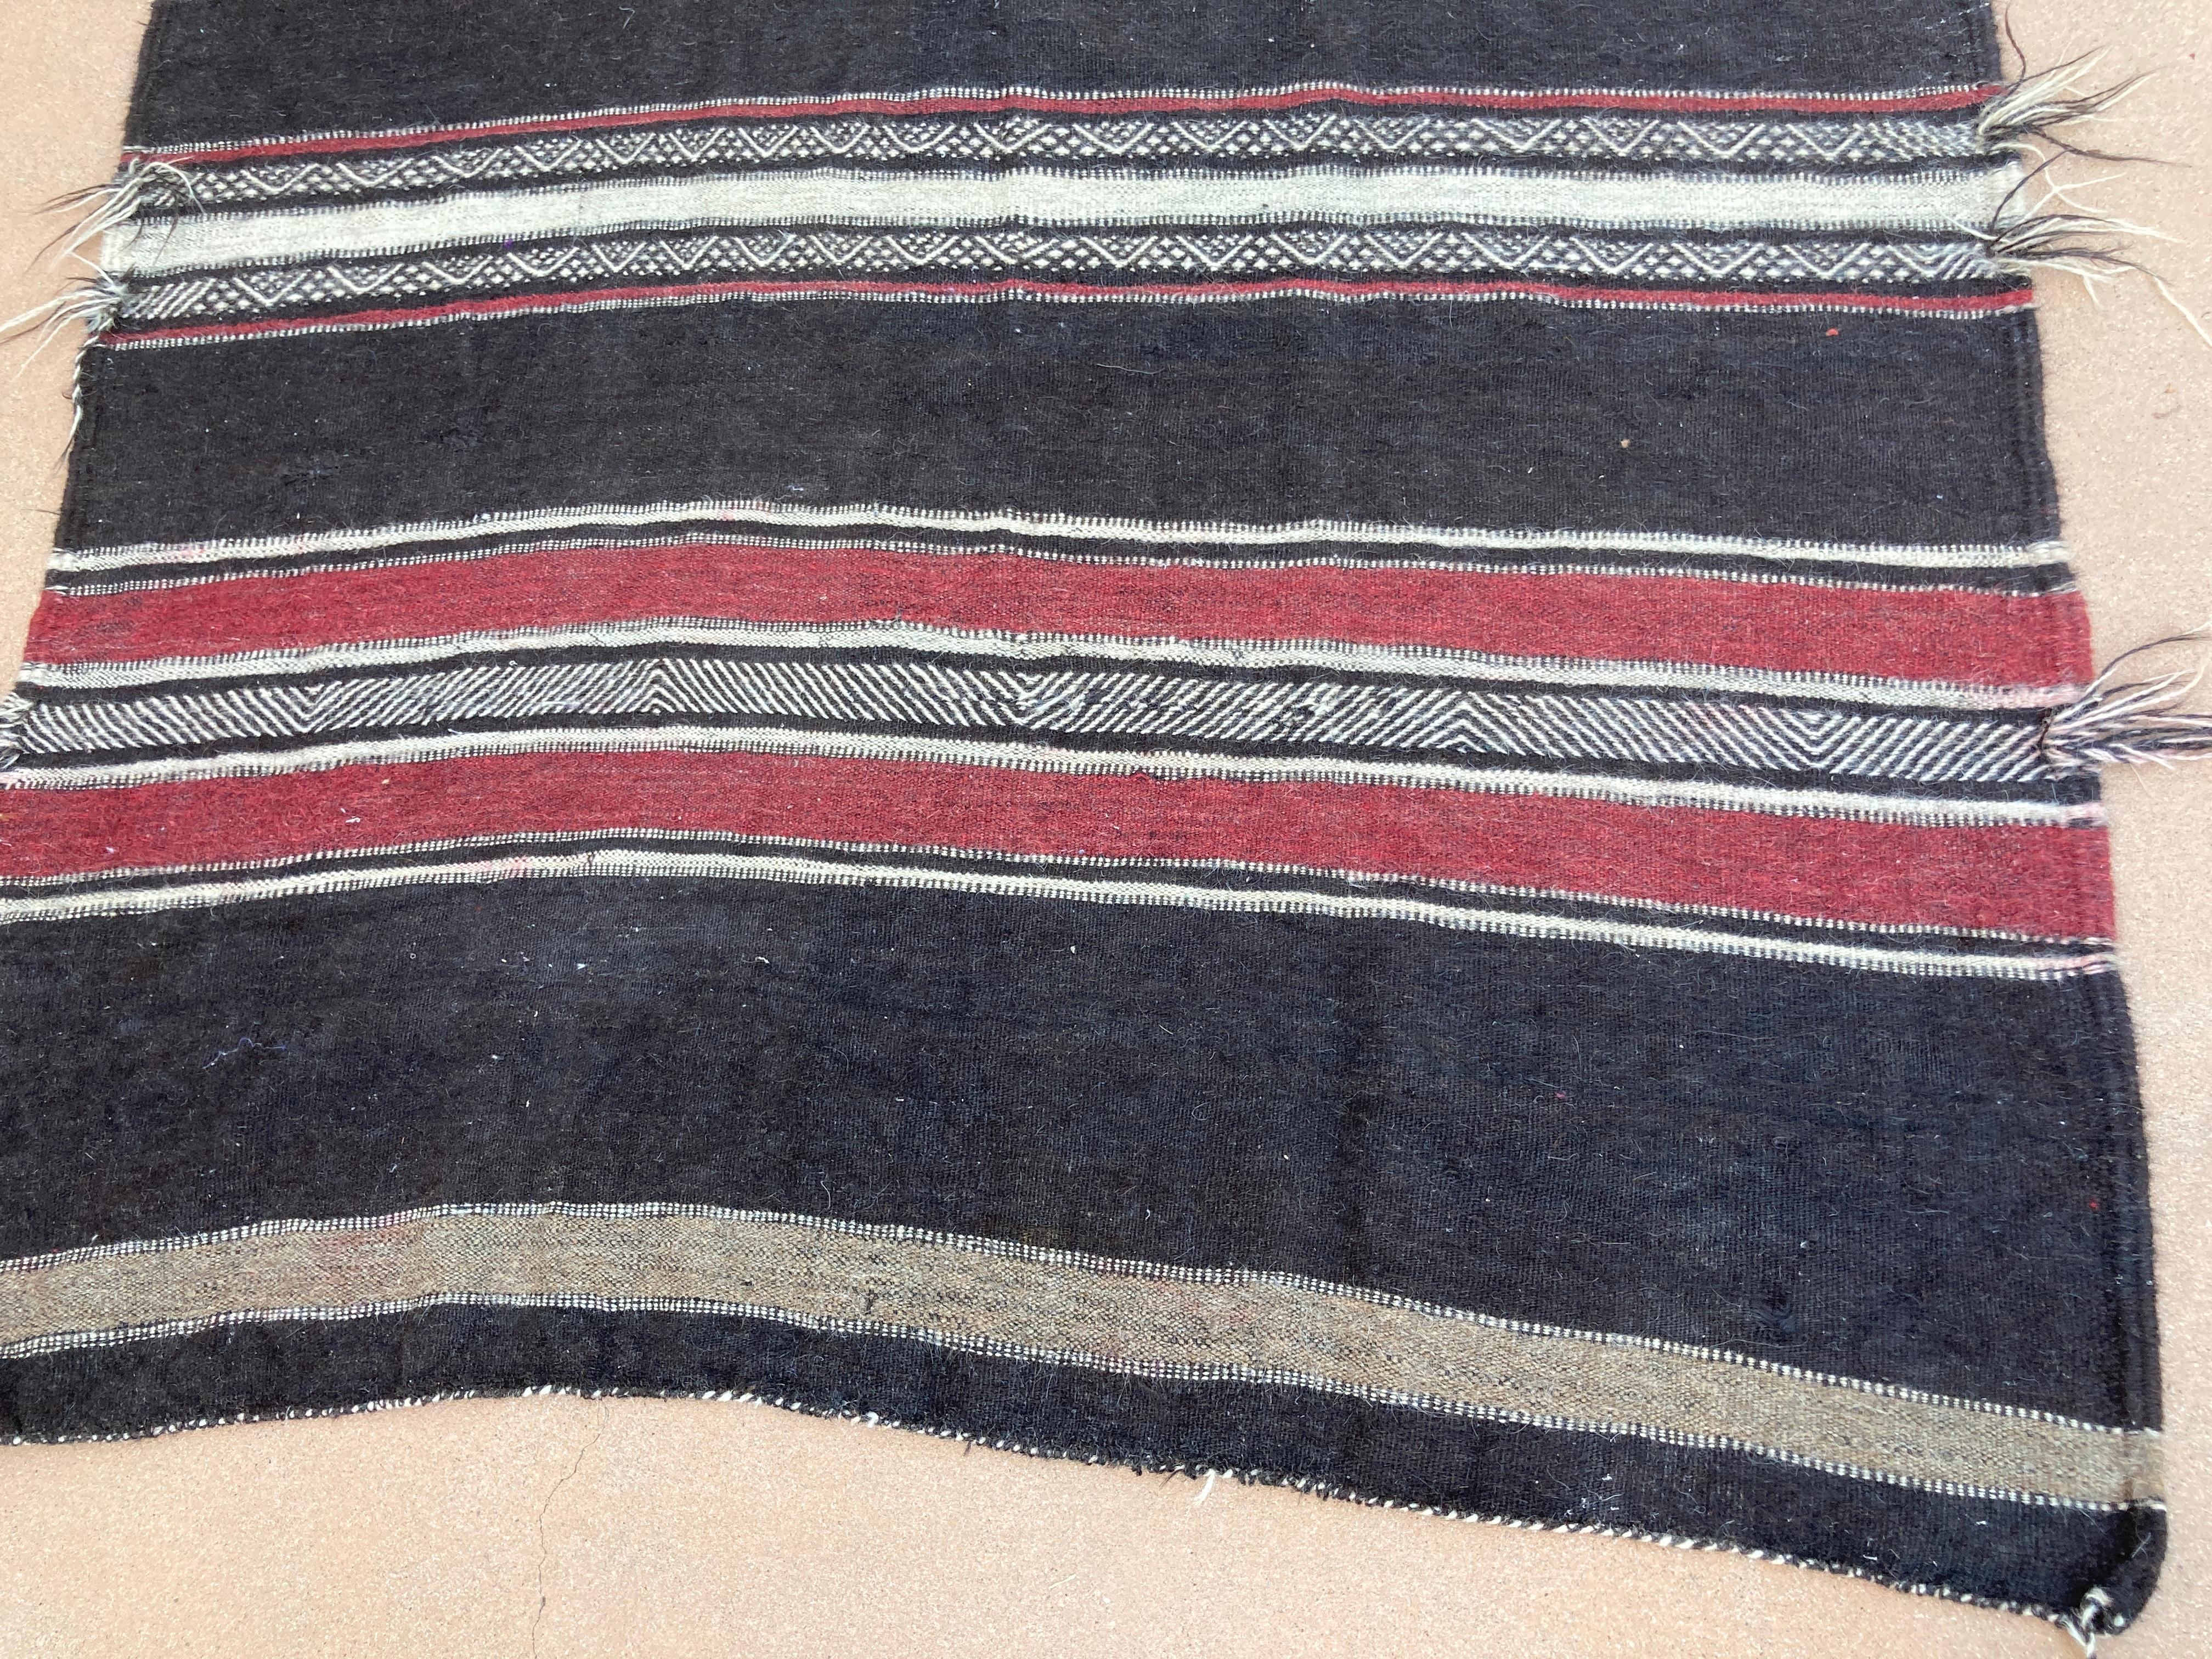 20th Century Moroccan Vintage Flat-Weave Black Camel Hair Tribal Rug For Sale